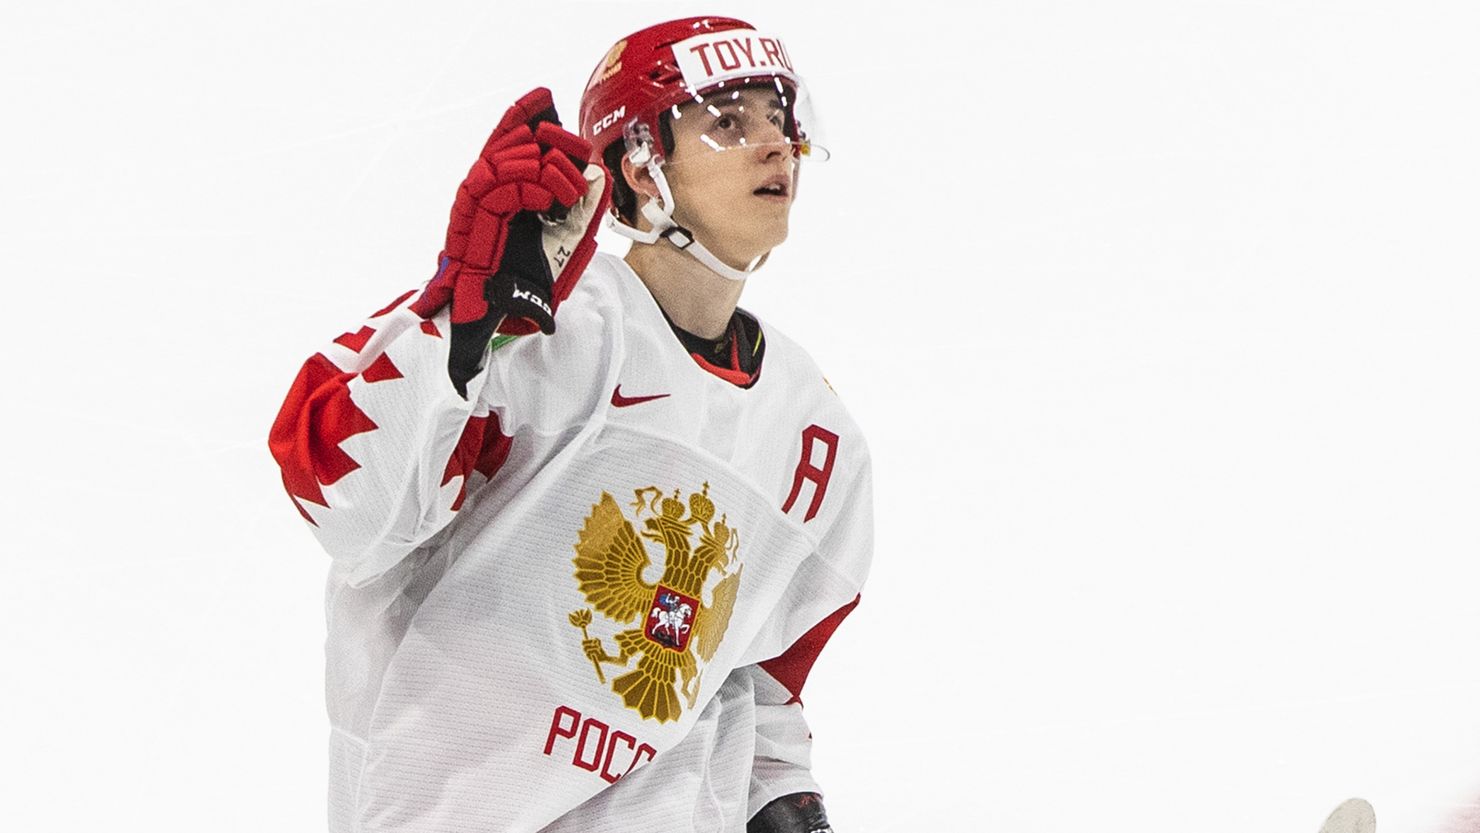 Amirov celebrates a goal against Austria during the first period of an IIHF World Junior Hockey Championship game in December 2020.